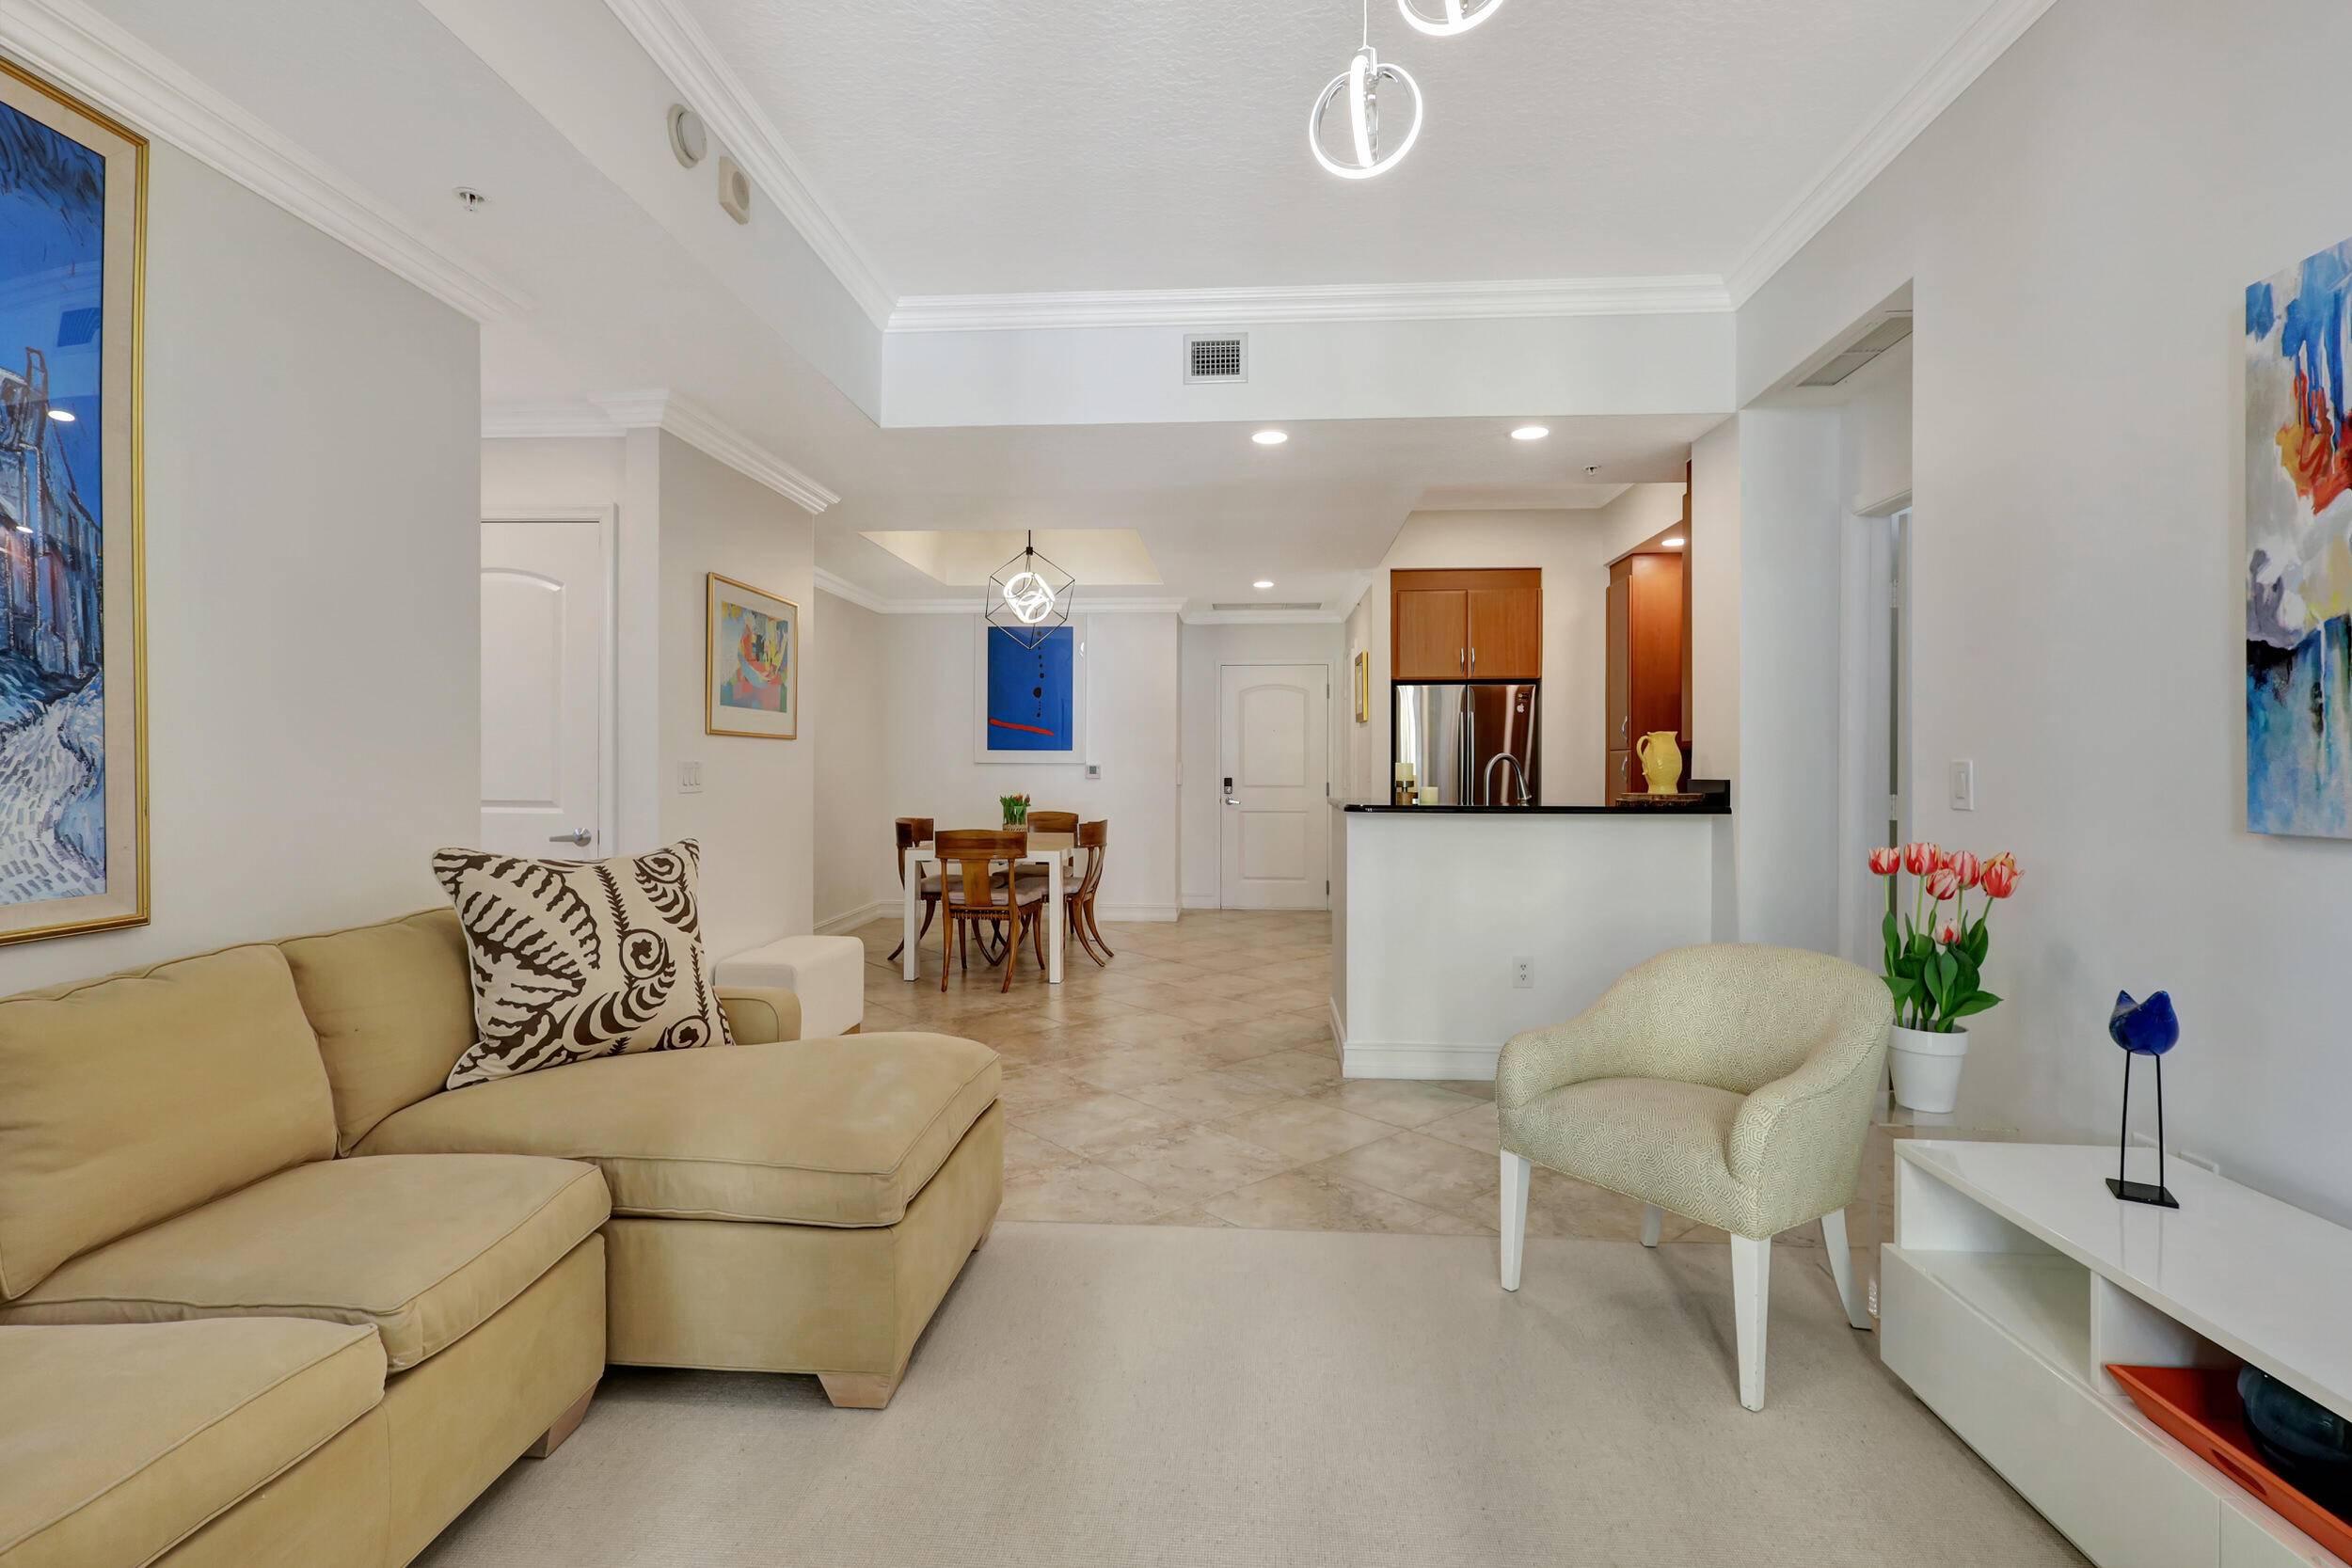 FANTASTIC UNFURNISHED RENTAL Condo, located in the luxury corridor of DOWNTOWN West Palm Beach !